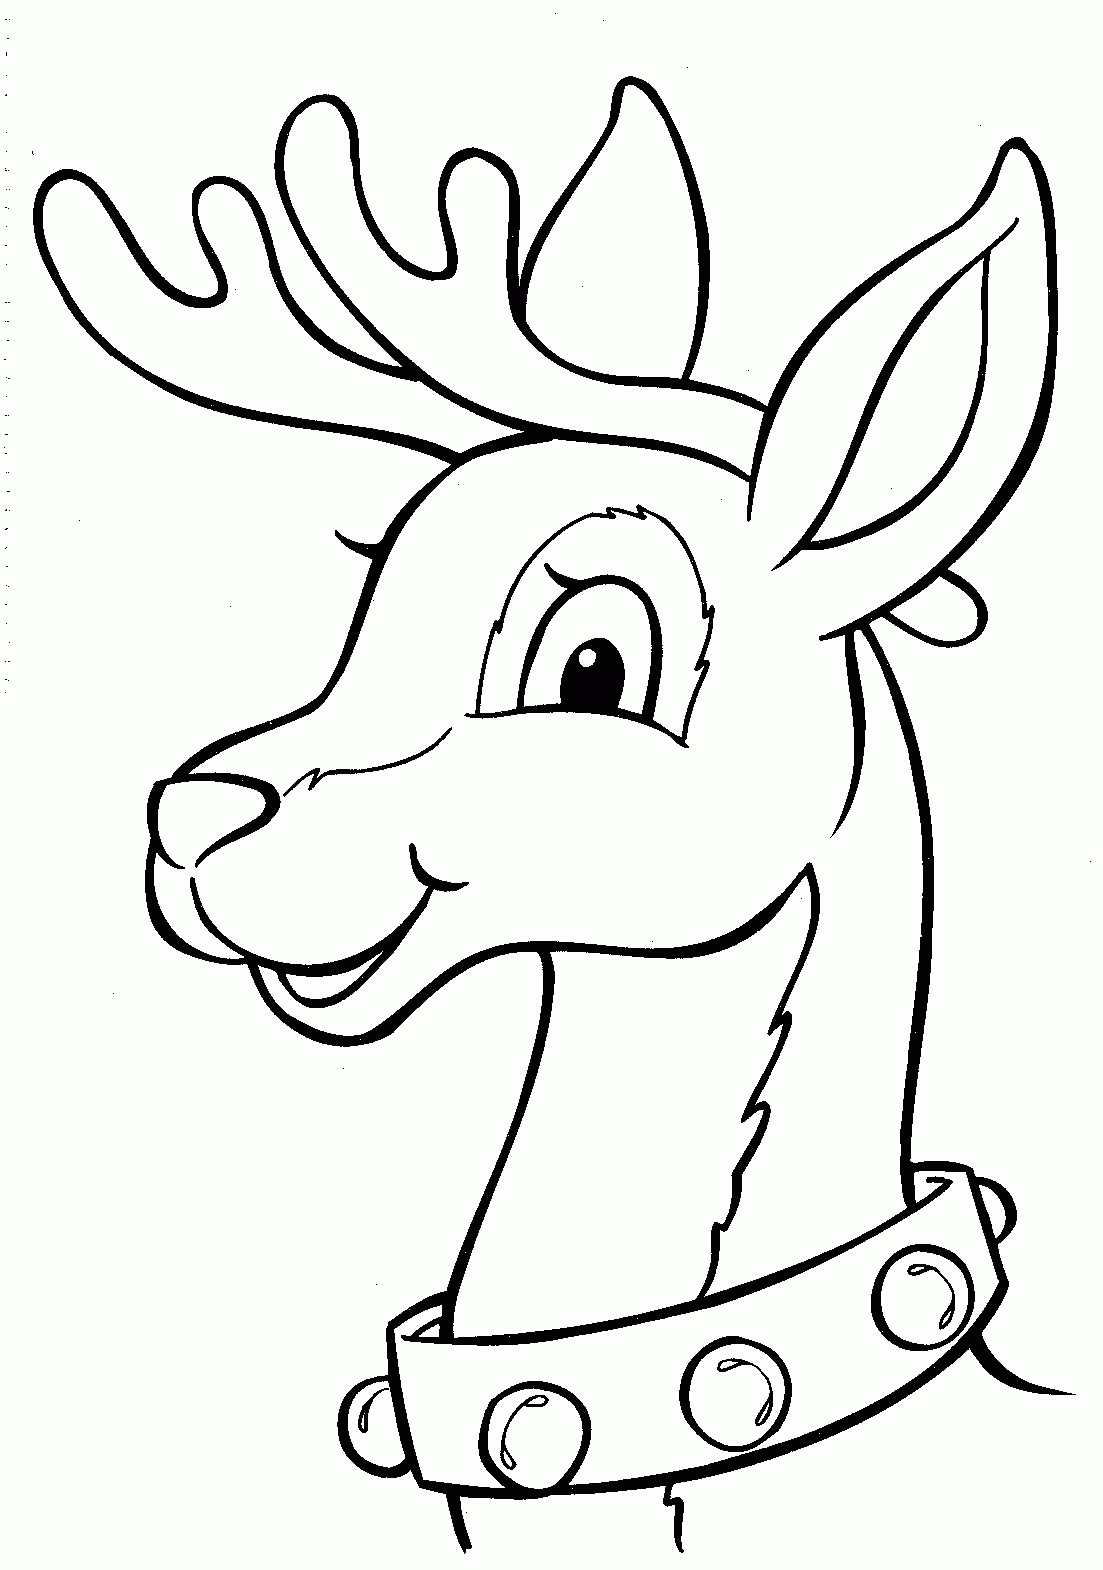 2015 Coloring Pages For Christmas Wallpapers Images 